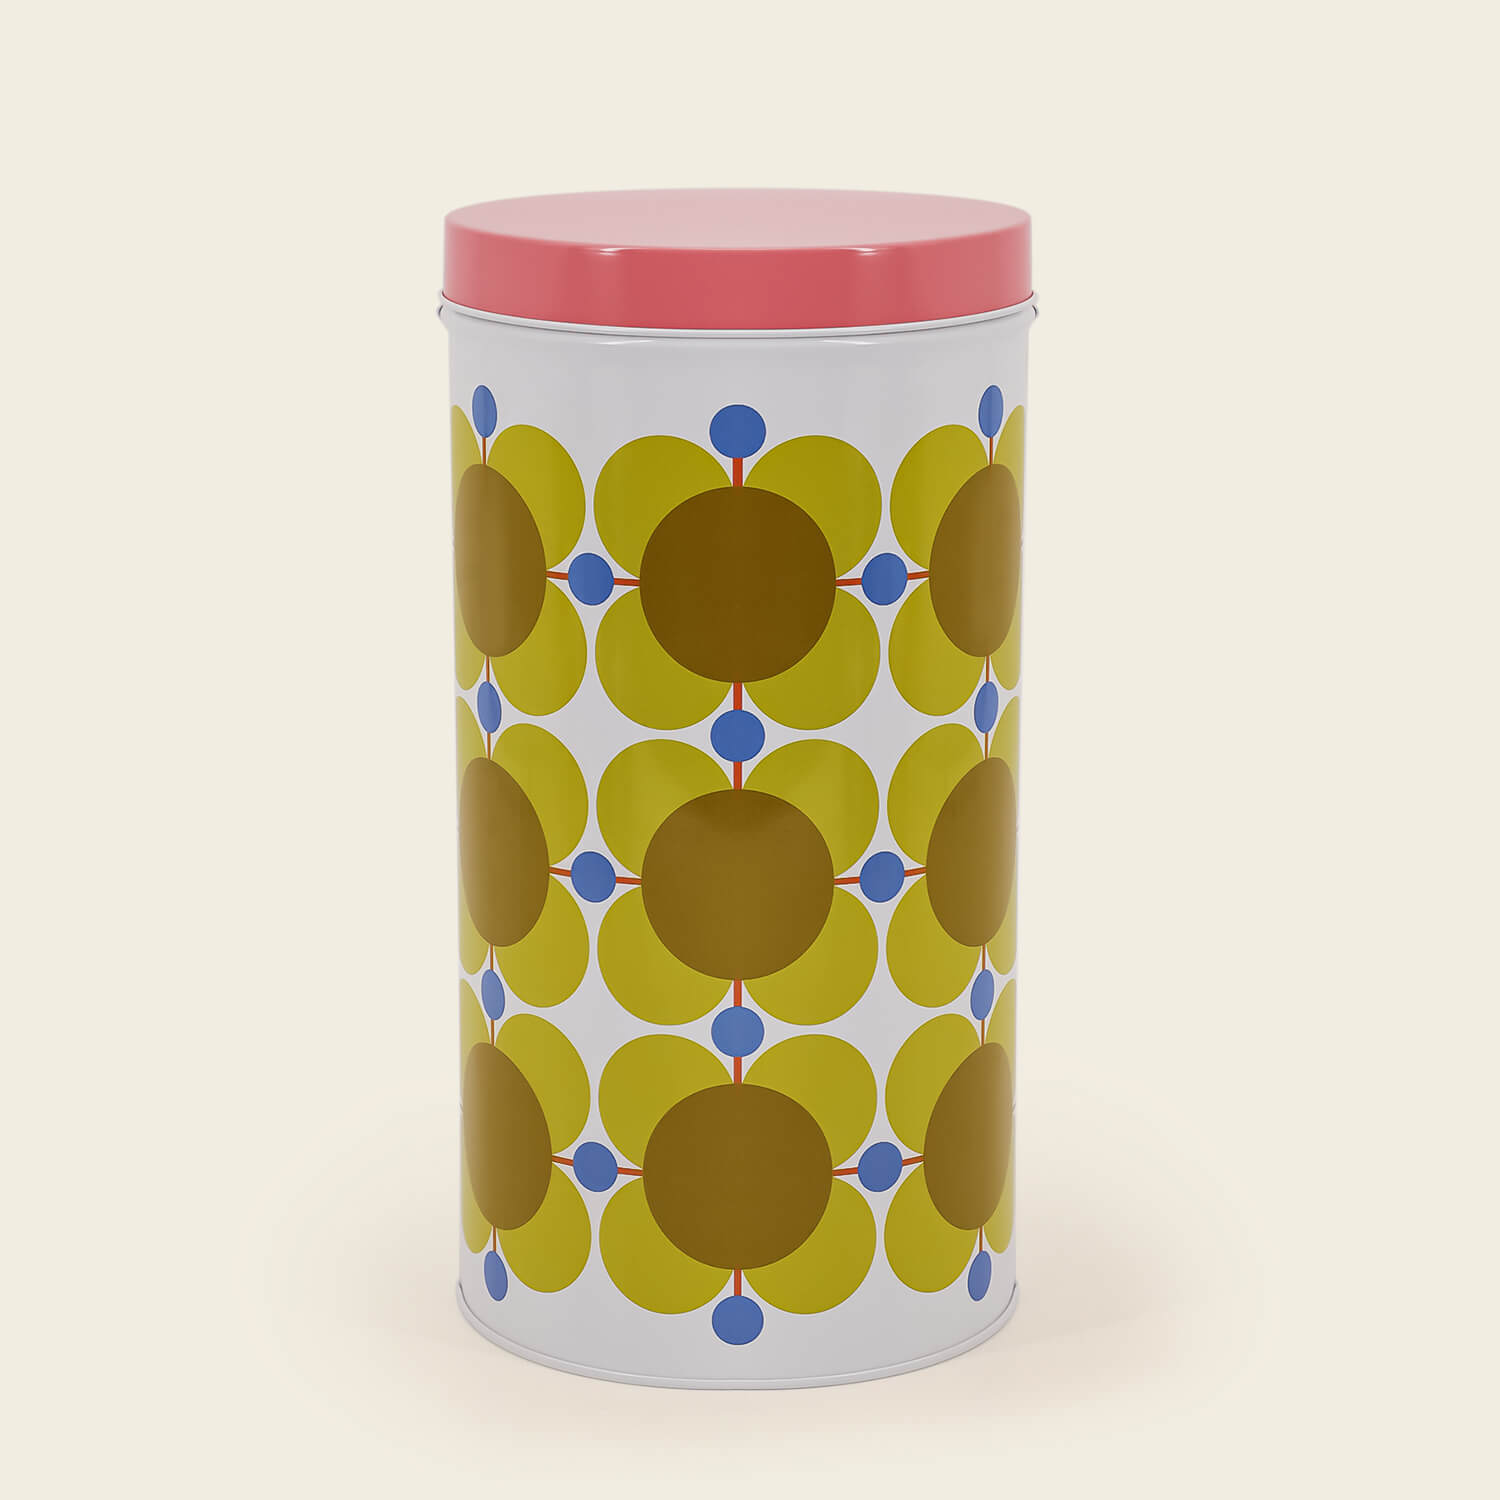 Orla Kiely Set of 3 Nesting Canister Tins - Atomic Flower 2 Shaws Department Stores